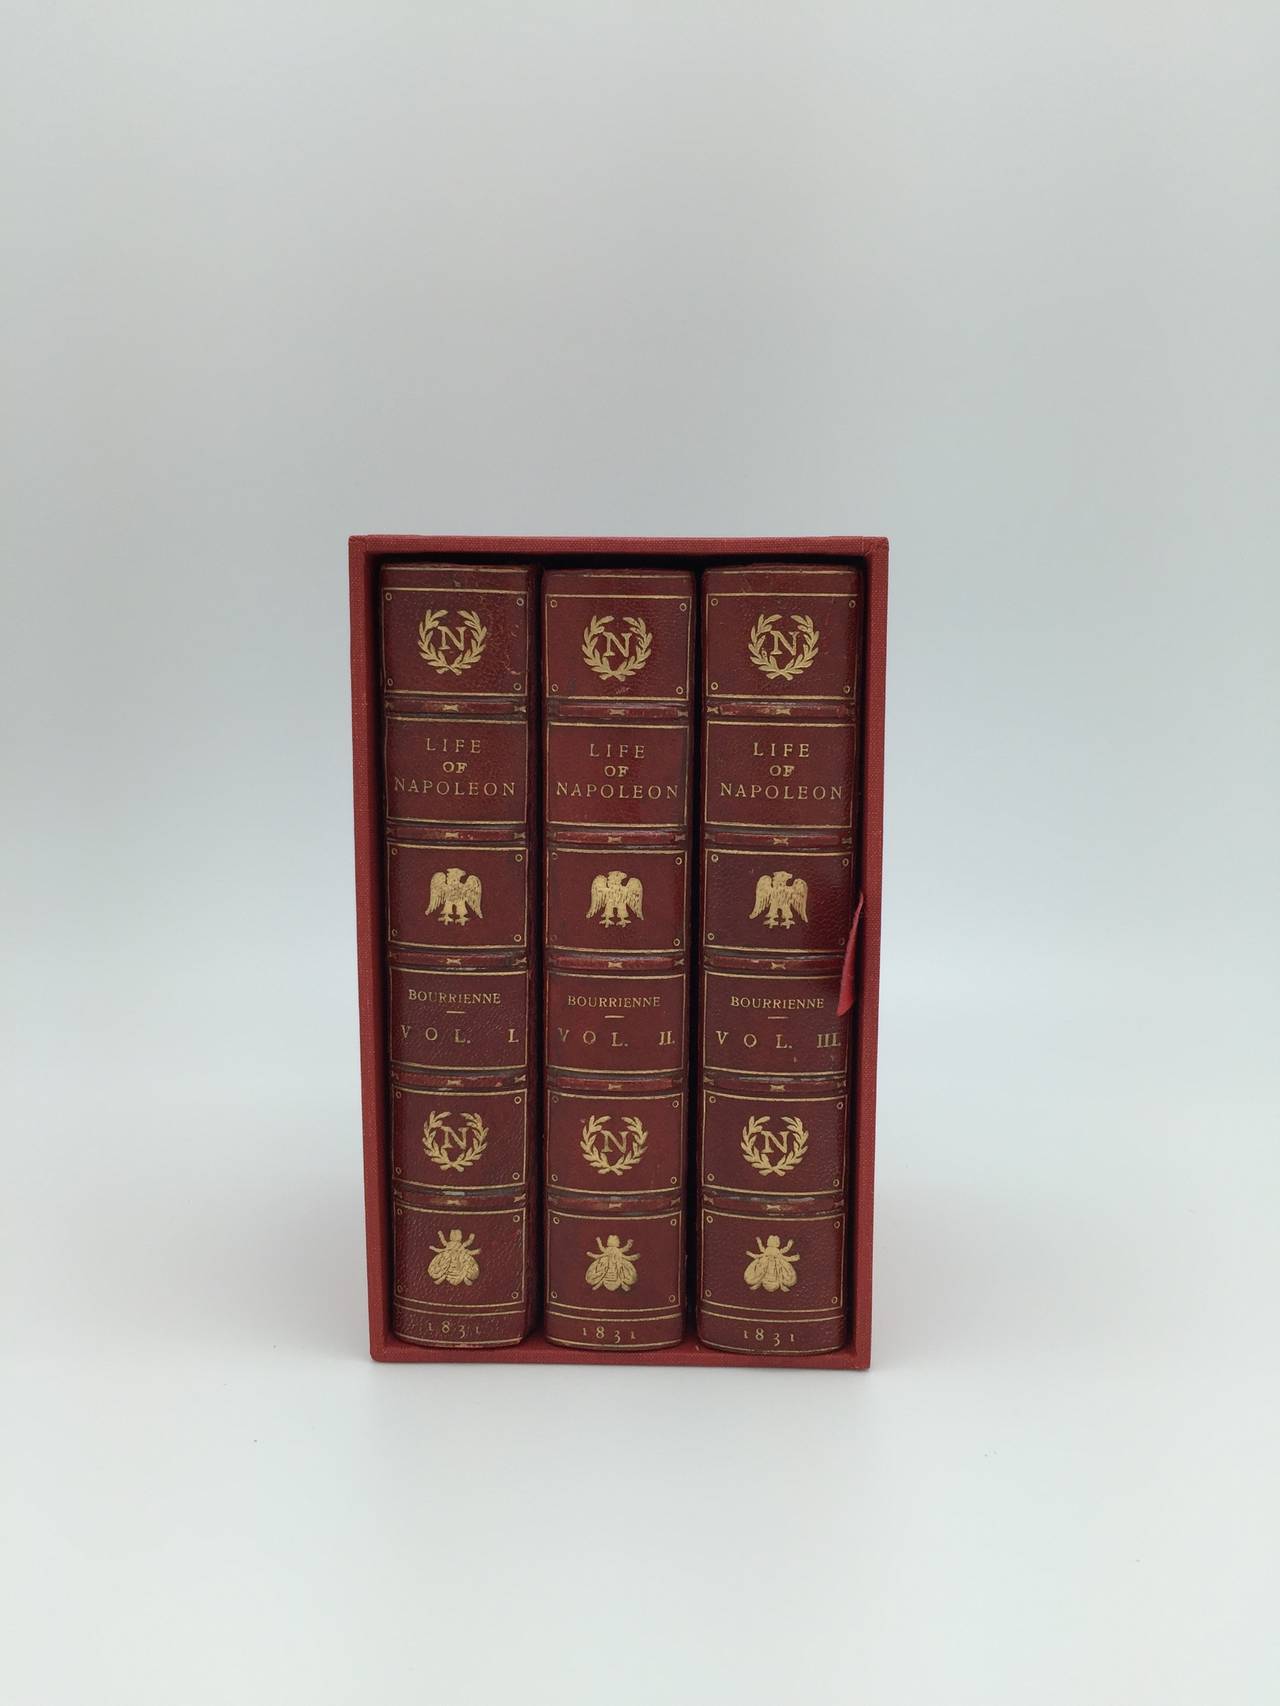 This is a three-volume set of Napoleon Bonaparte's memoirs written by his private secretary, Louis Antoine Fauvelede de Bourrienne. This is the second edition of the seminal work of Napoleon's life. 

Published in 1831 in London, England by Henry